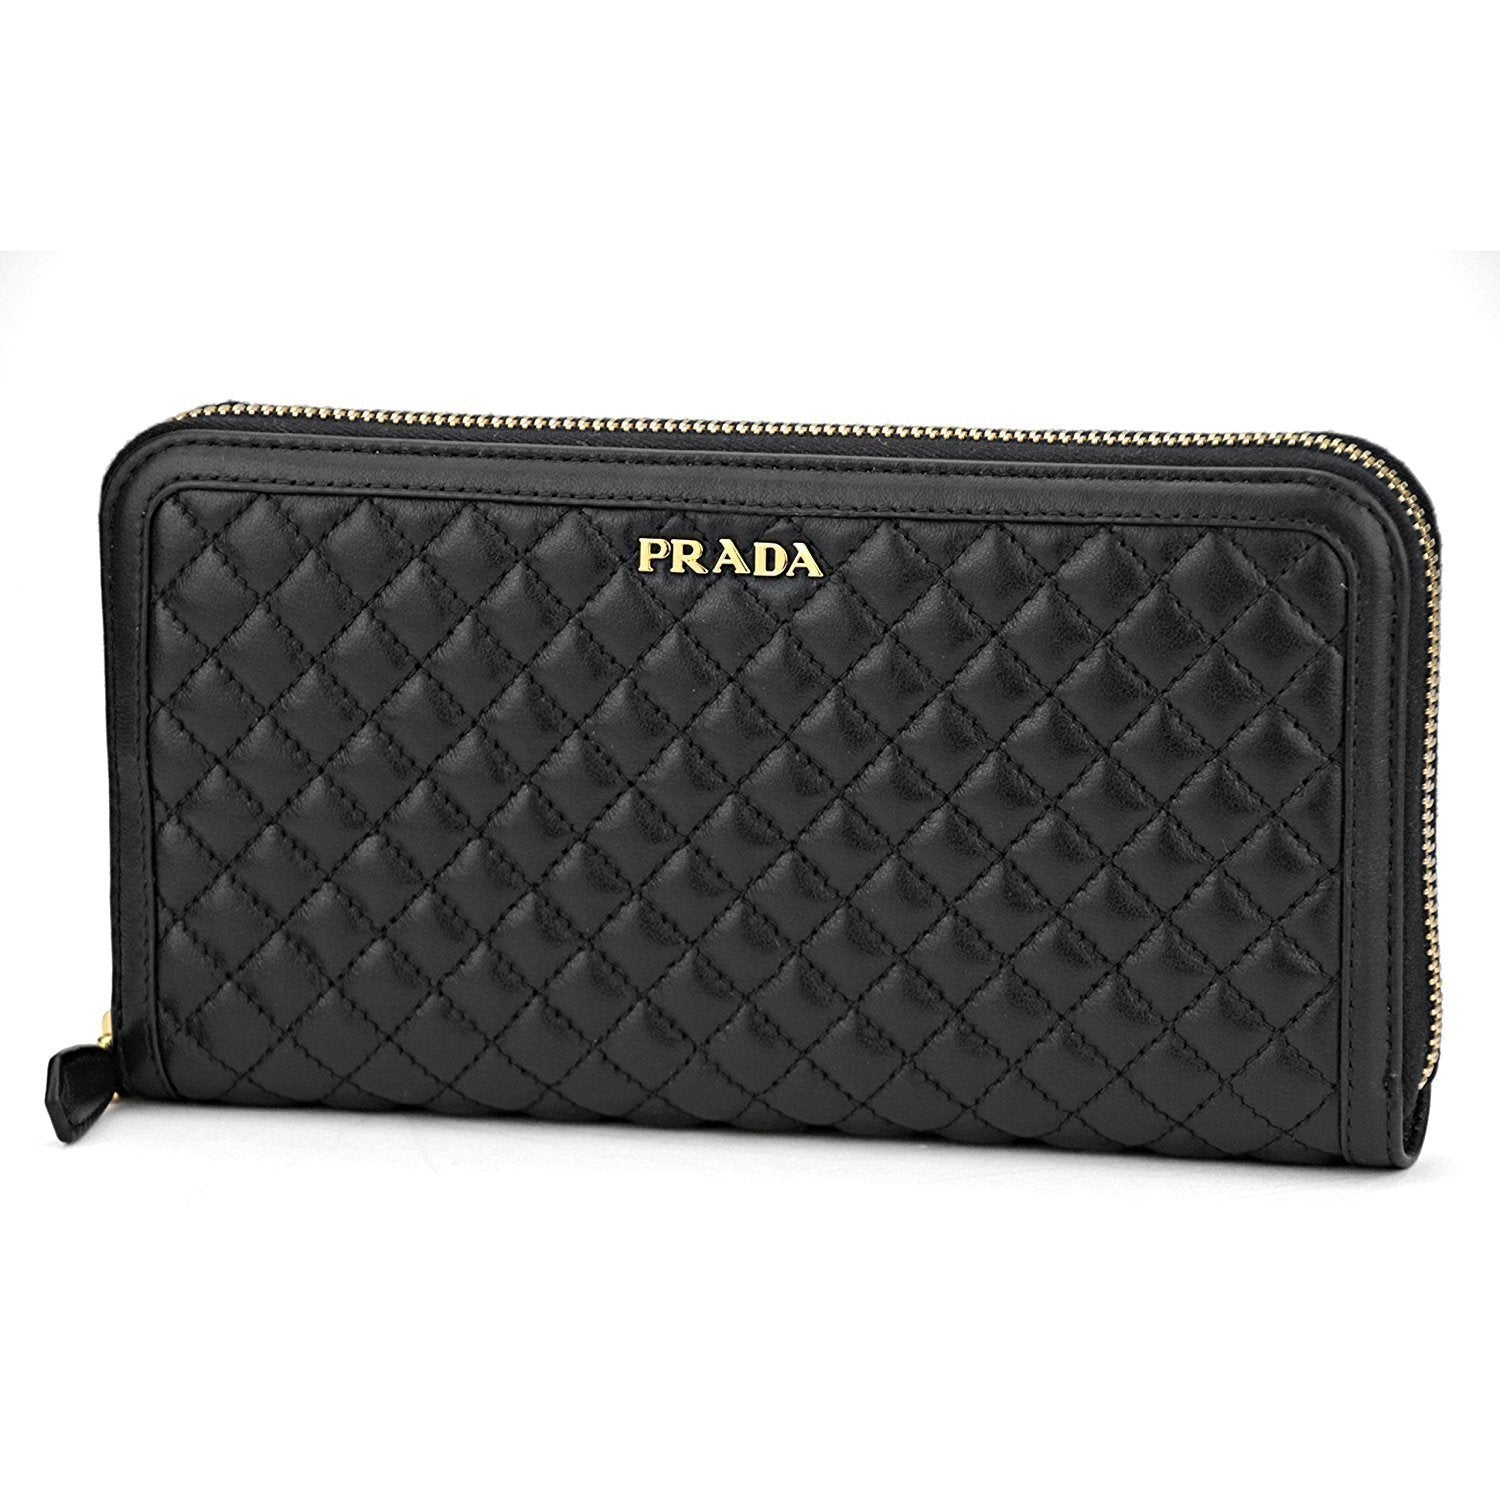 Prada Wallet in Stitched Quilted Pattern Black Leather 1ML506 at_Queen_Bee_of_Beverly_Hills